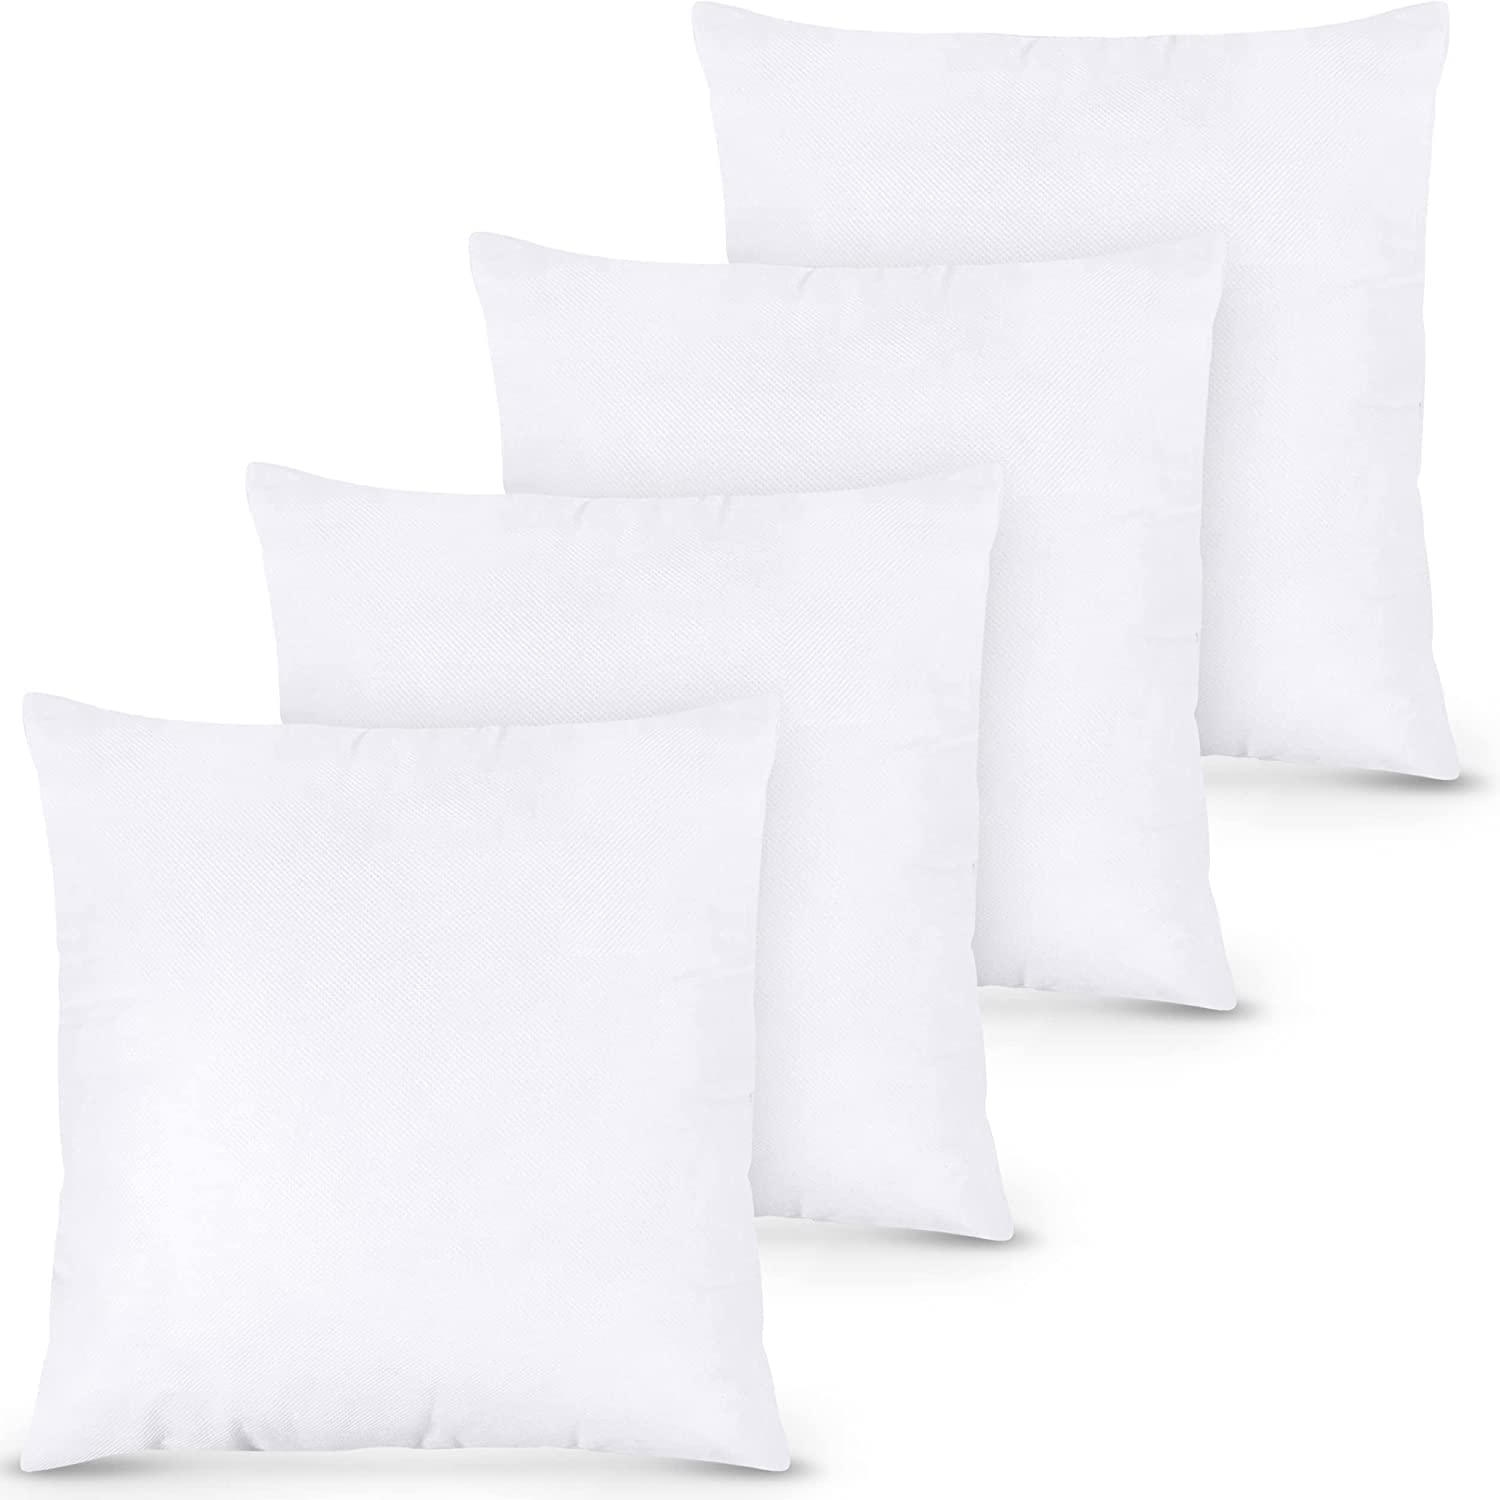 Utopia Bedding Throw Pillow Inserts (Pack Of 4, White), 16 X 16 Inches  Decorative Indoor Pillows For Sofa, Bed, Couch, Cushion S